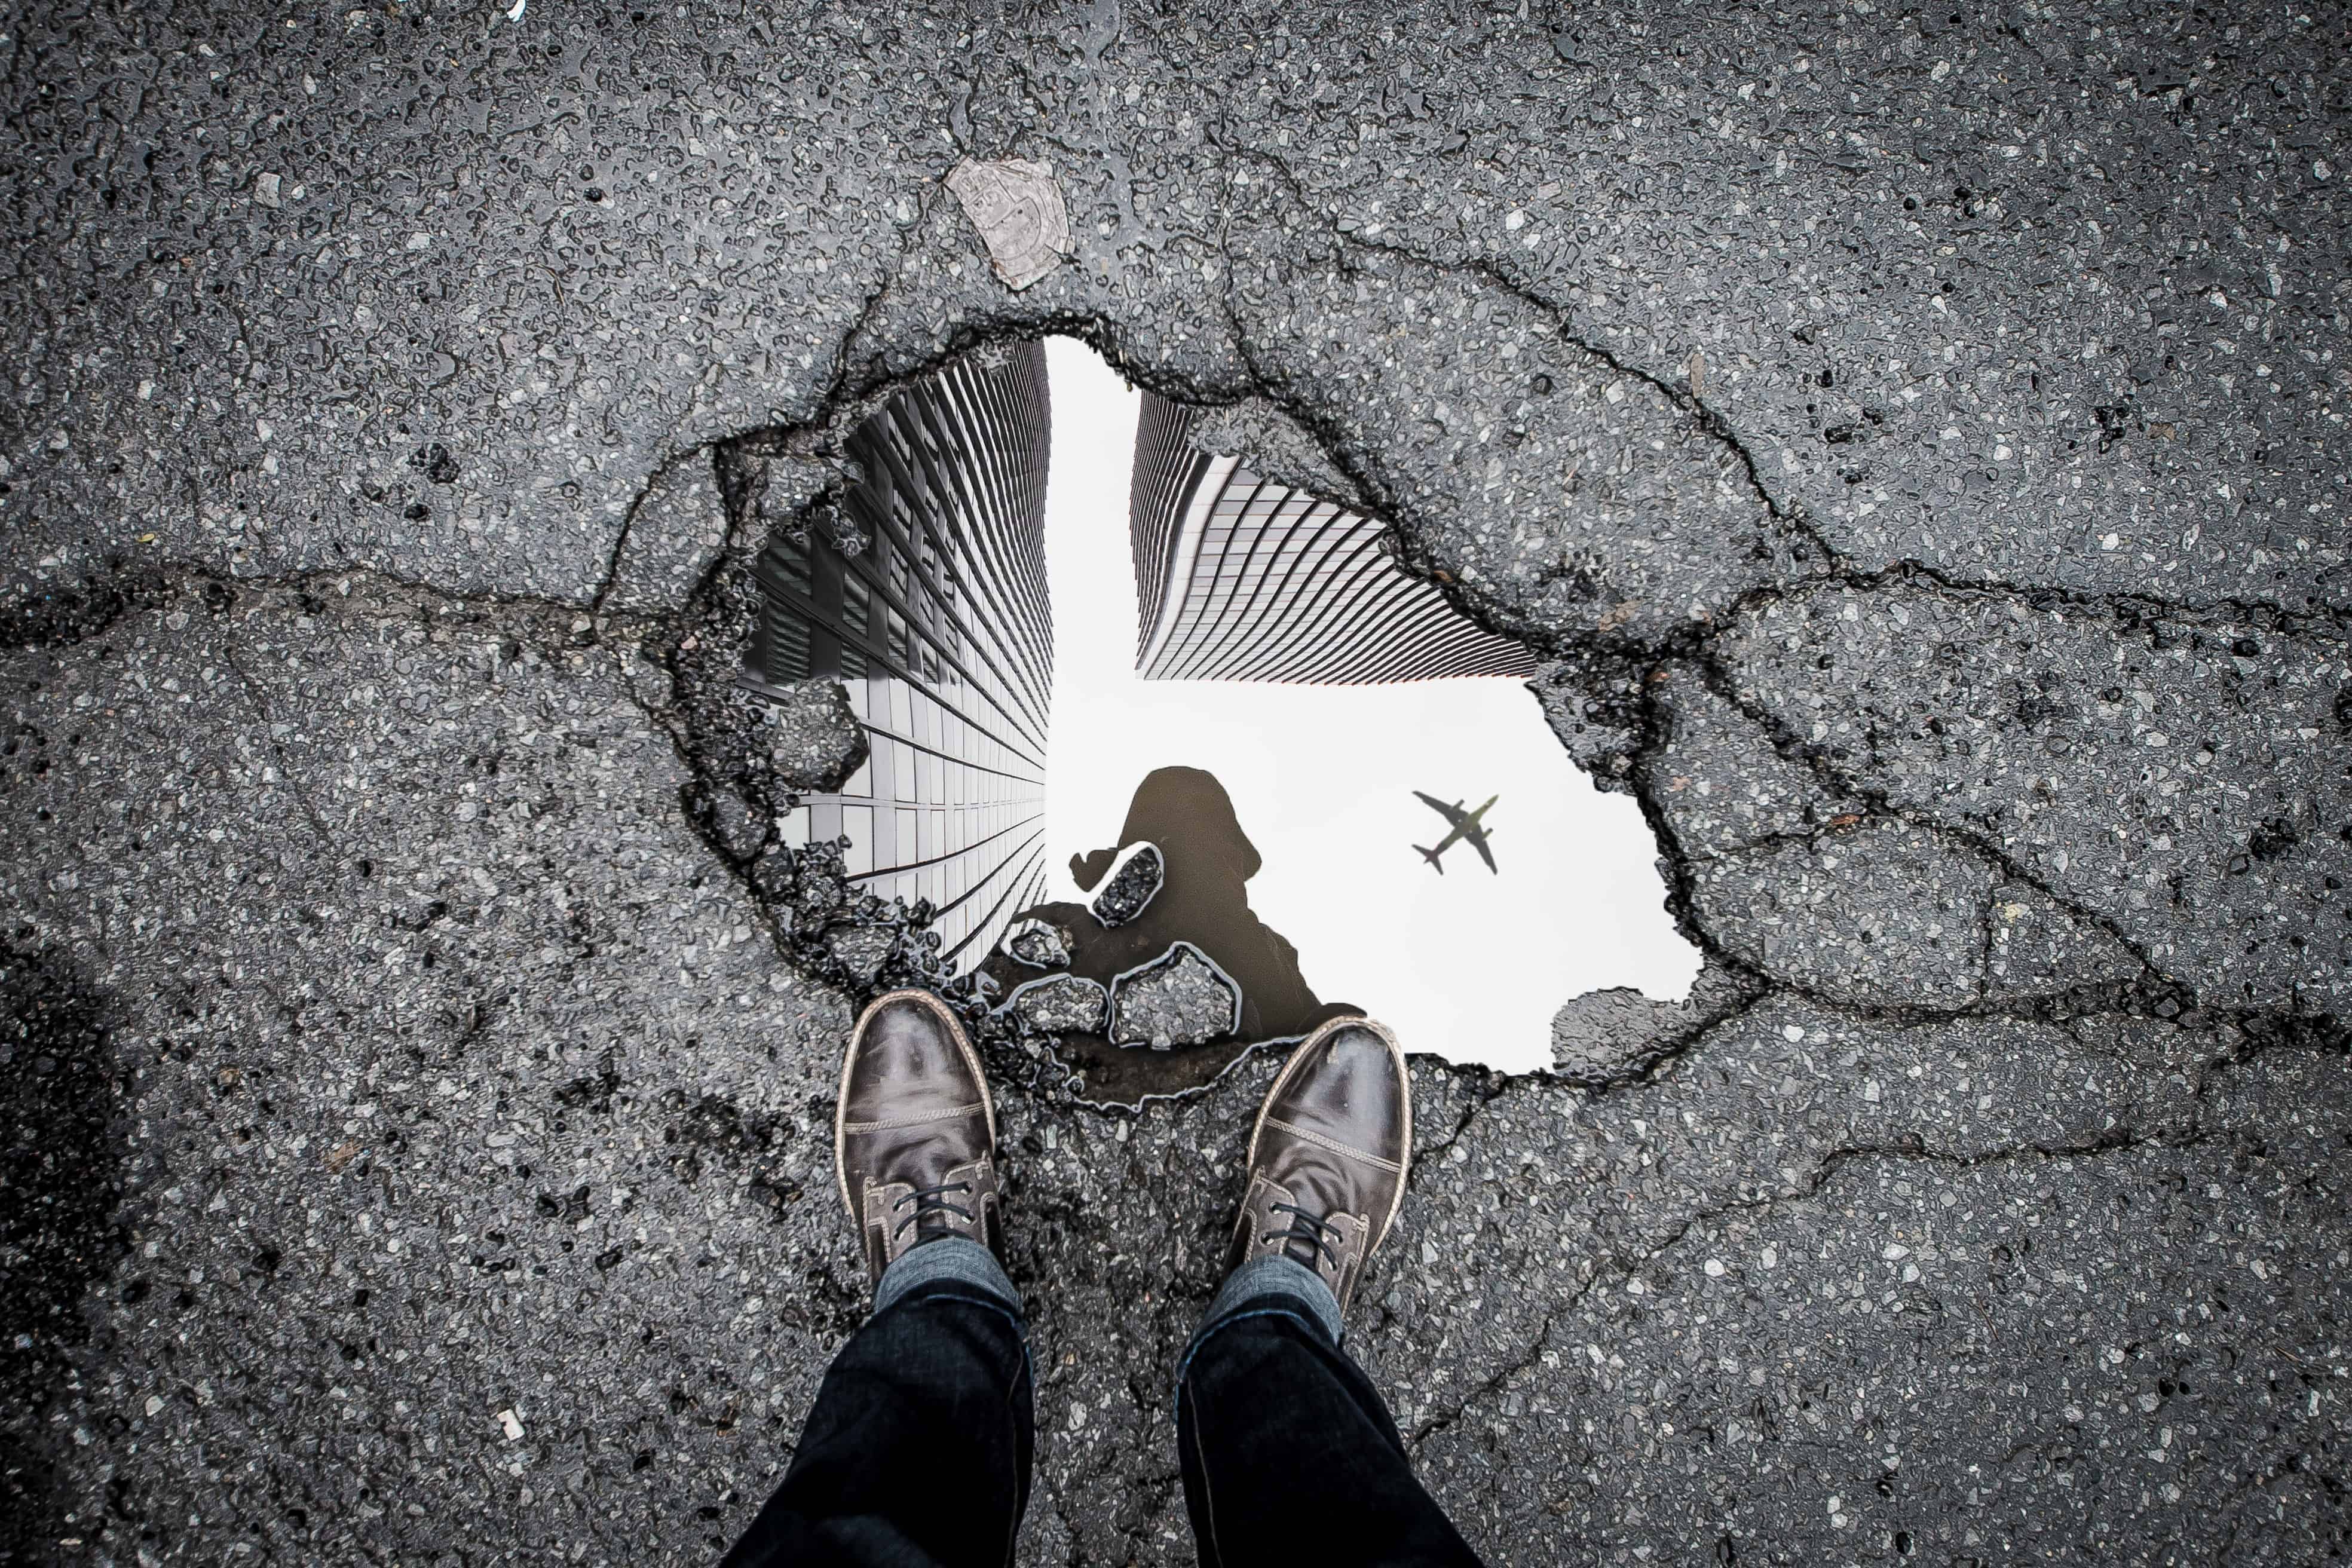 Feet and puddle with puddle reflecting a person, buildings, and a plane flying overhead